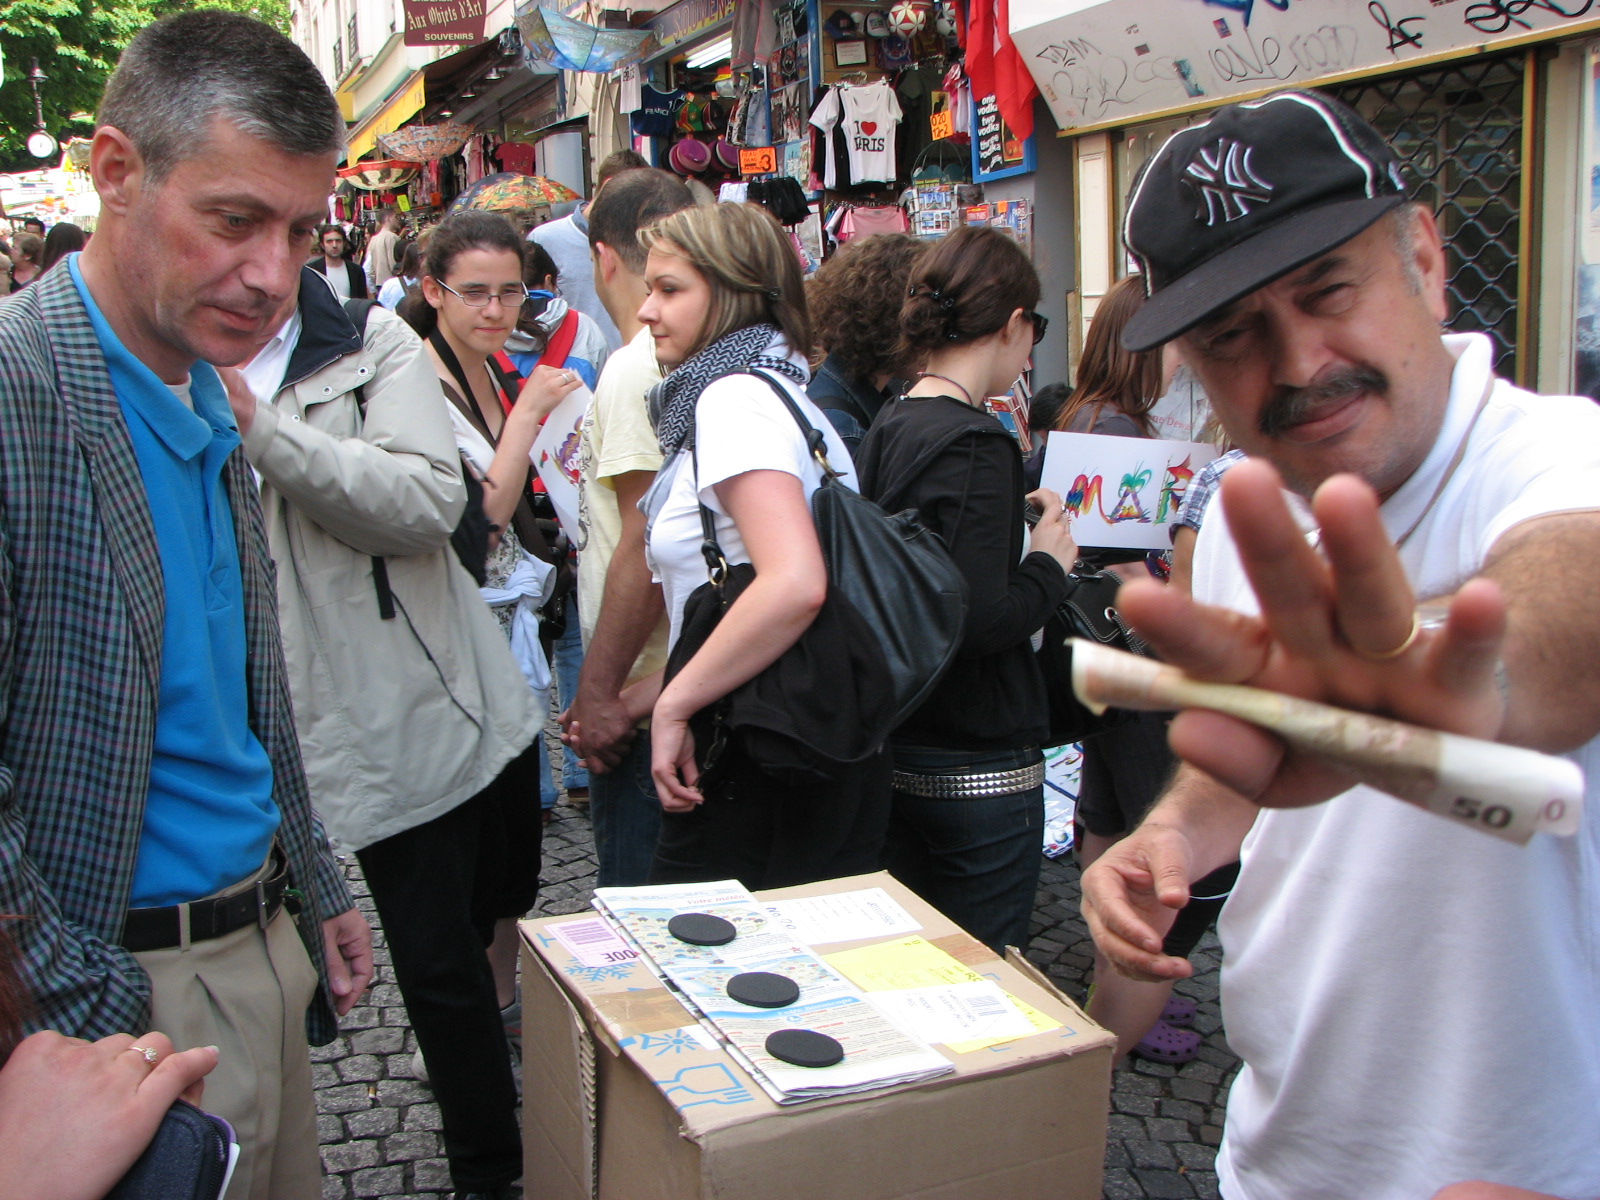 a_photo_of_a_gambling_stand_in_paris